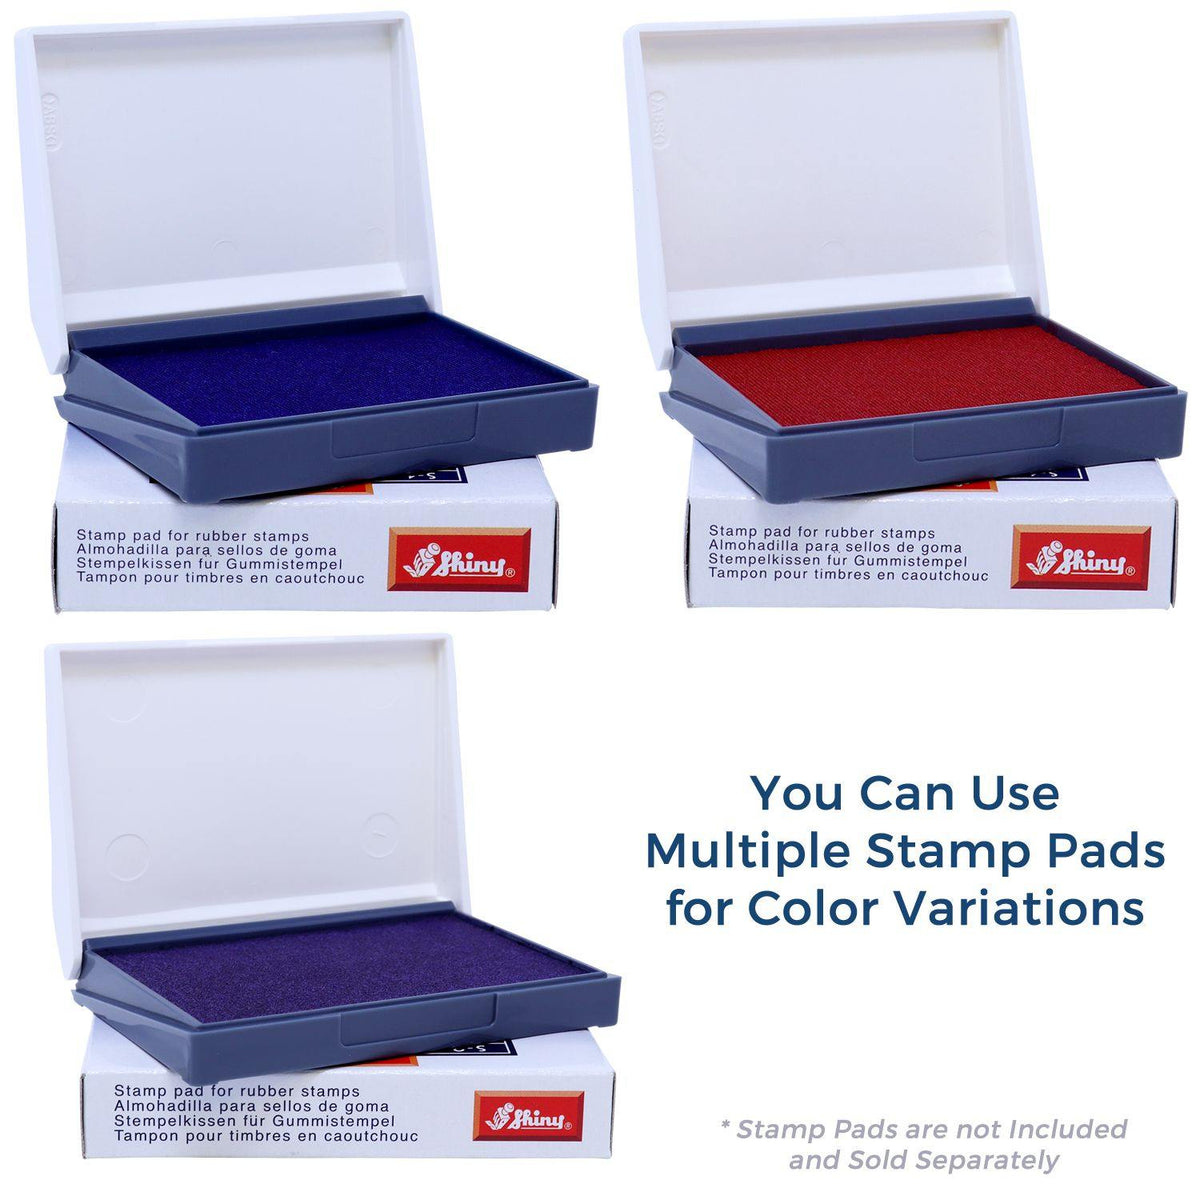 Stamp Pads for First Class Mail International Rubber Stamp Available